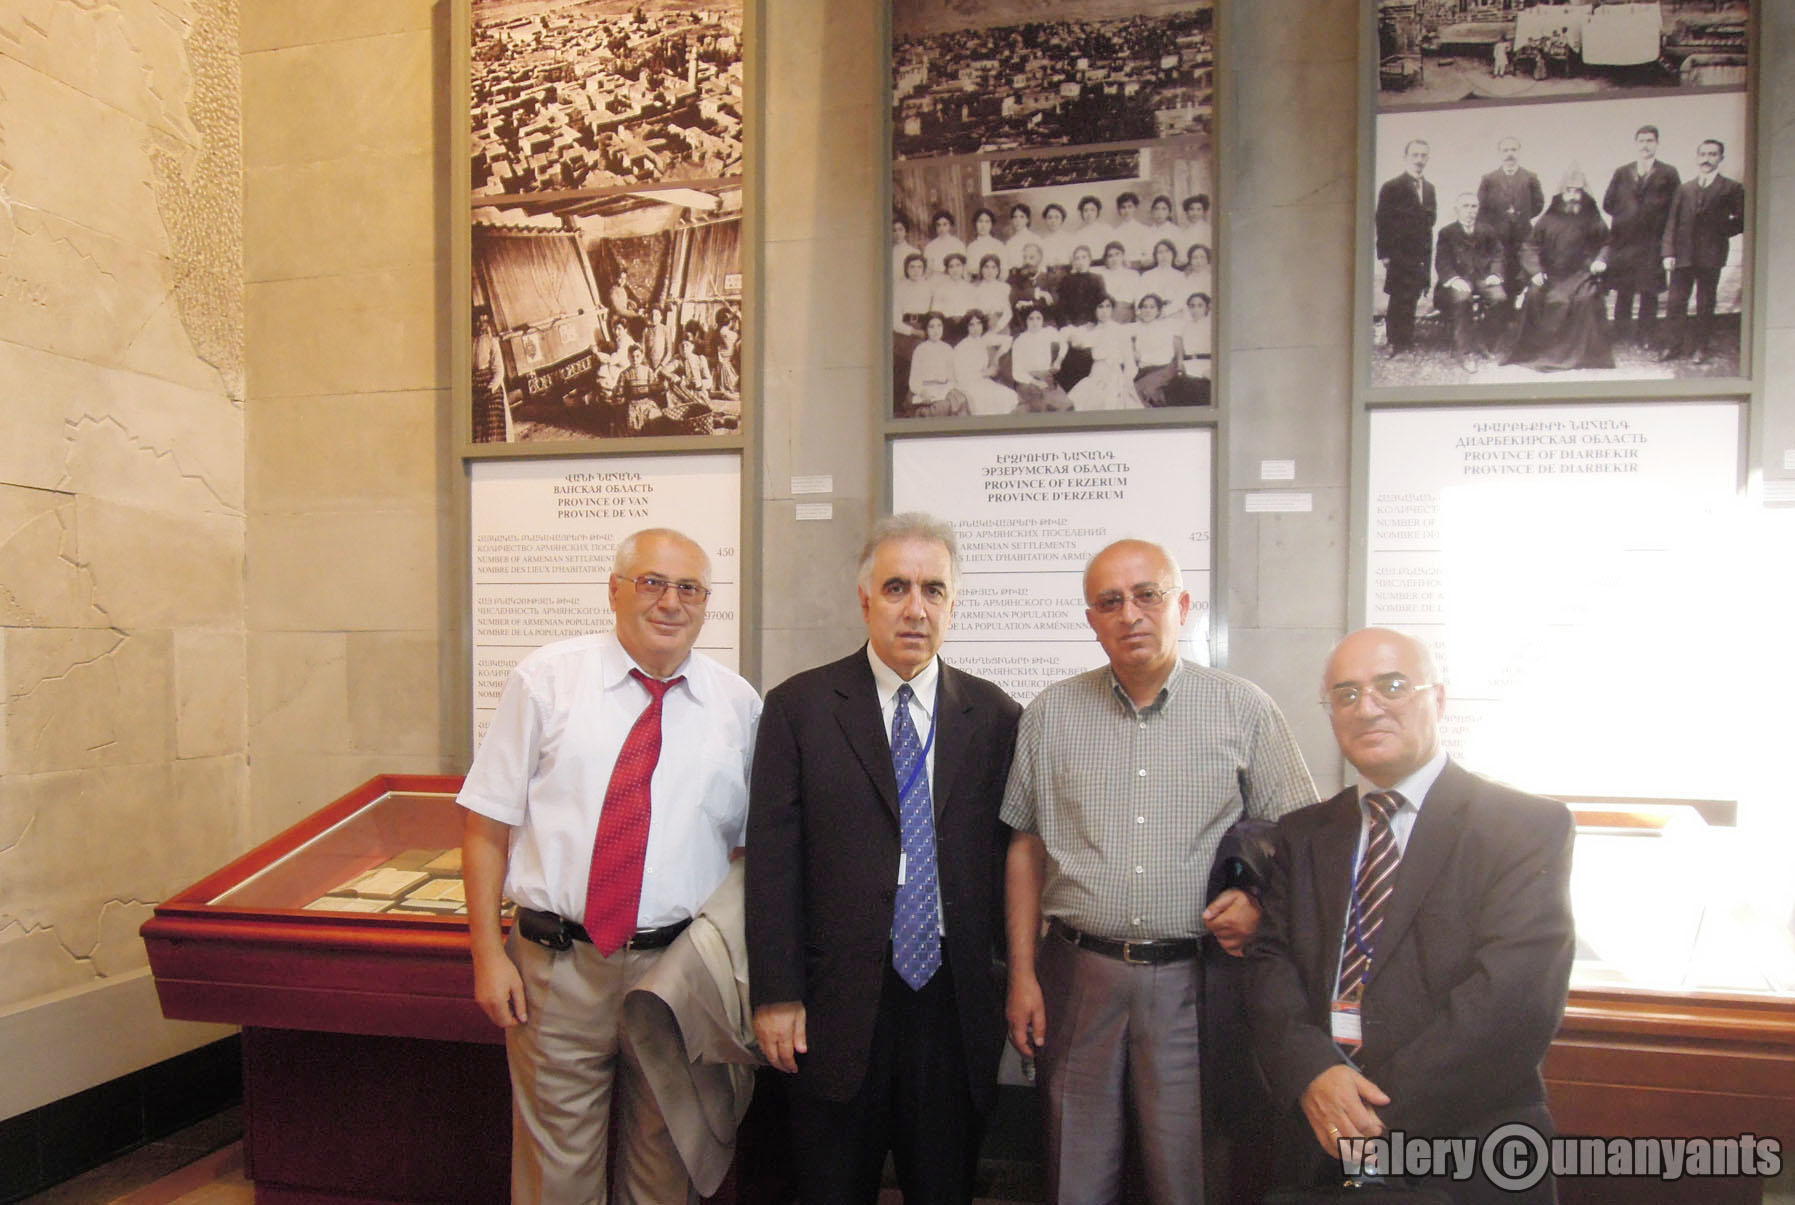 At the Armenian Genocide Museum. Left to right: Fahrad Apujanyan, editor of <i>Lusardzak</i> newspaper in Spitak; Harut Sassounian, publisher of the US-based <i>The California Courier</i>; Pap Hayrapetyan; and Felix Gevorgyan, Kaliningrad journalist.